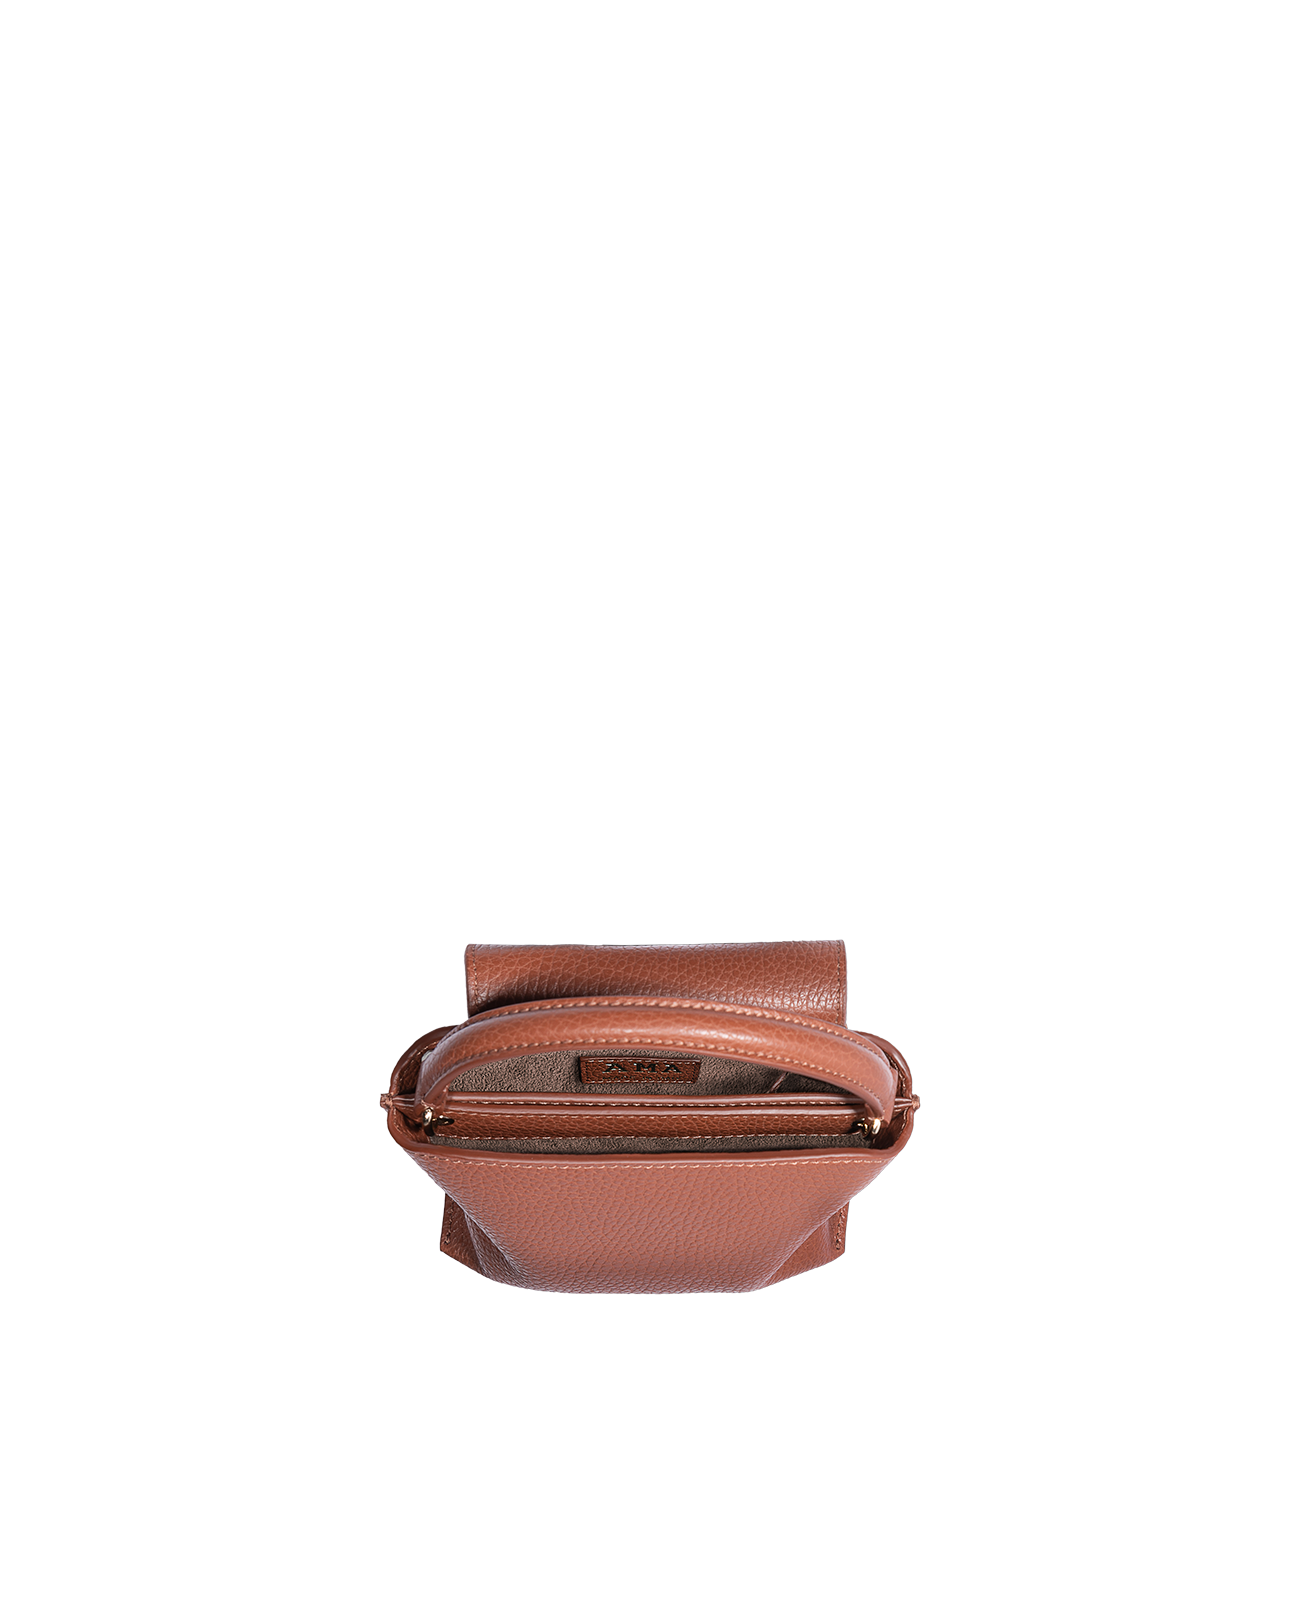 Cross-body bag in Italian full-grain leather, semi-aniline calf Italian leather with detachable shoulder strap.Three compartments, zip pocket in the back compartment. Magnetic flap closure with logo. Color: Brown. Size:Mini